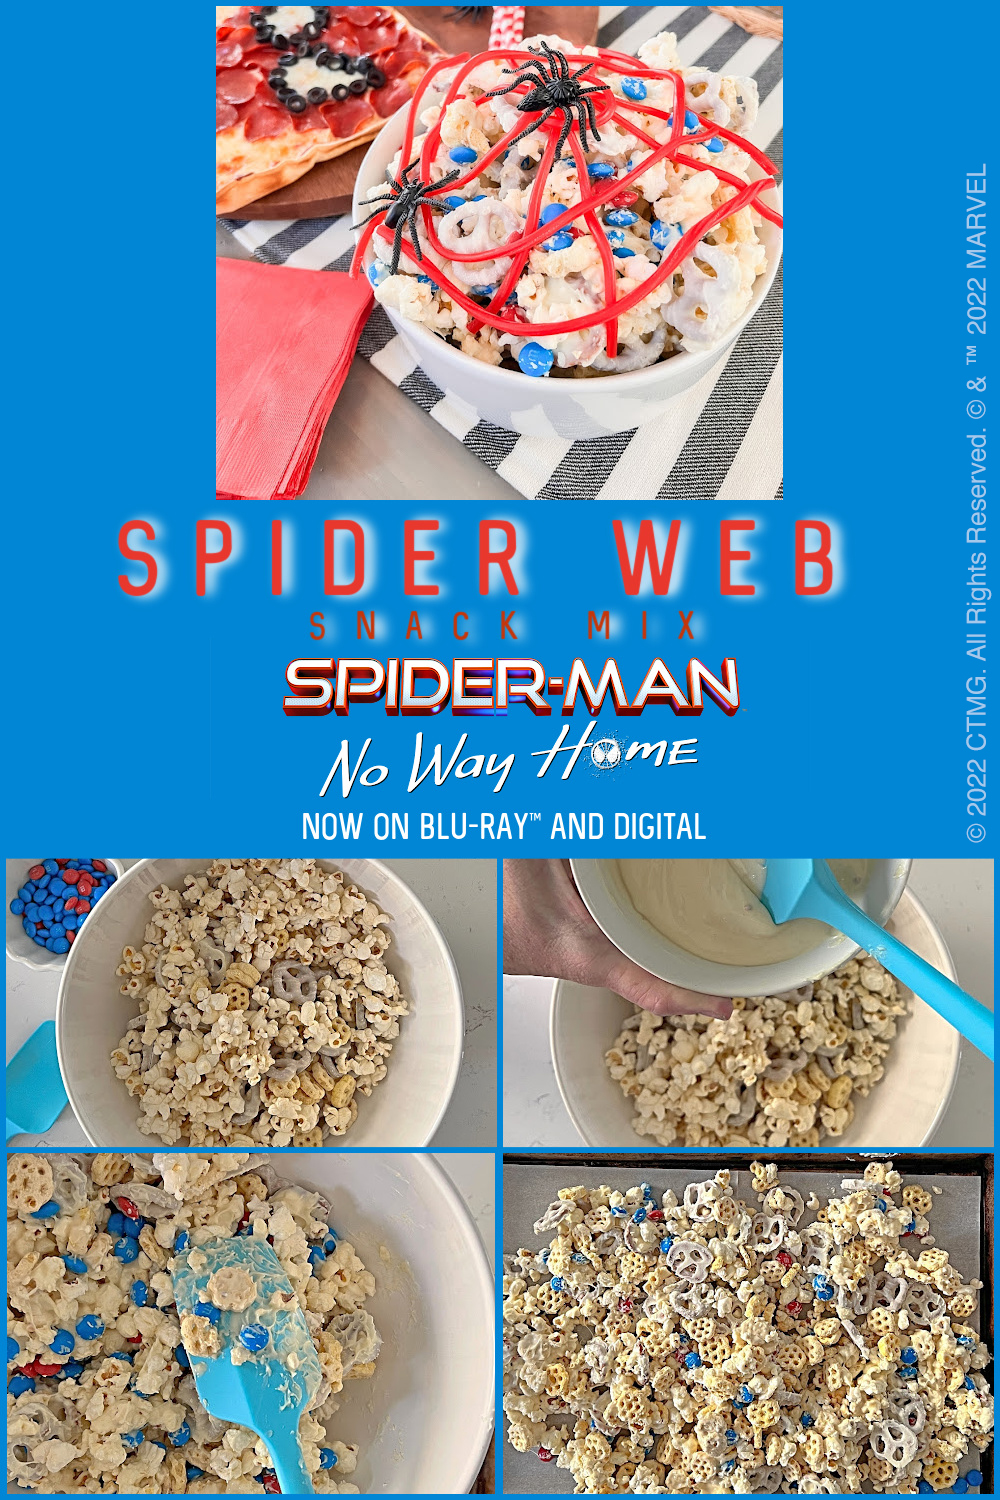 Family Movie Night with Spider-Man: No Way Home! Watch the new Spider-Man: No Way Home movie with Spider-Man themed frozen drinks, Spidey mask pizzas and spider web snack mix! 